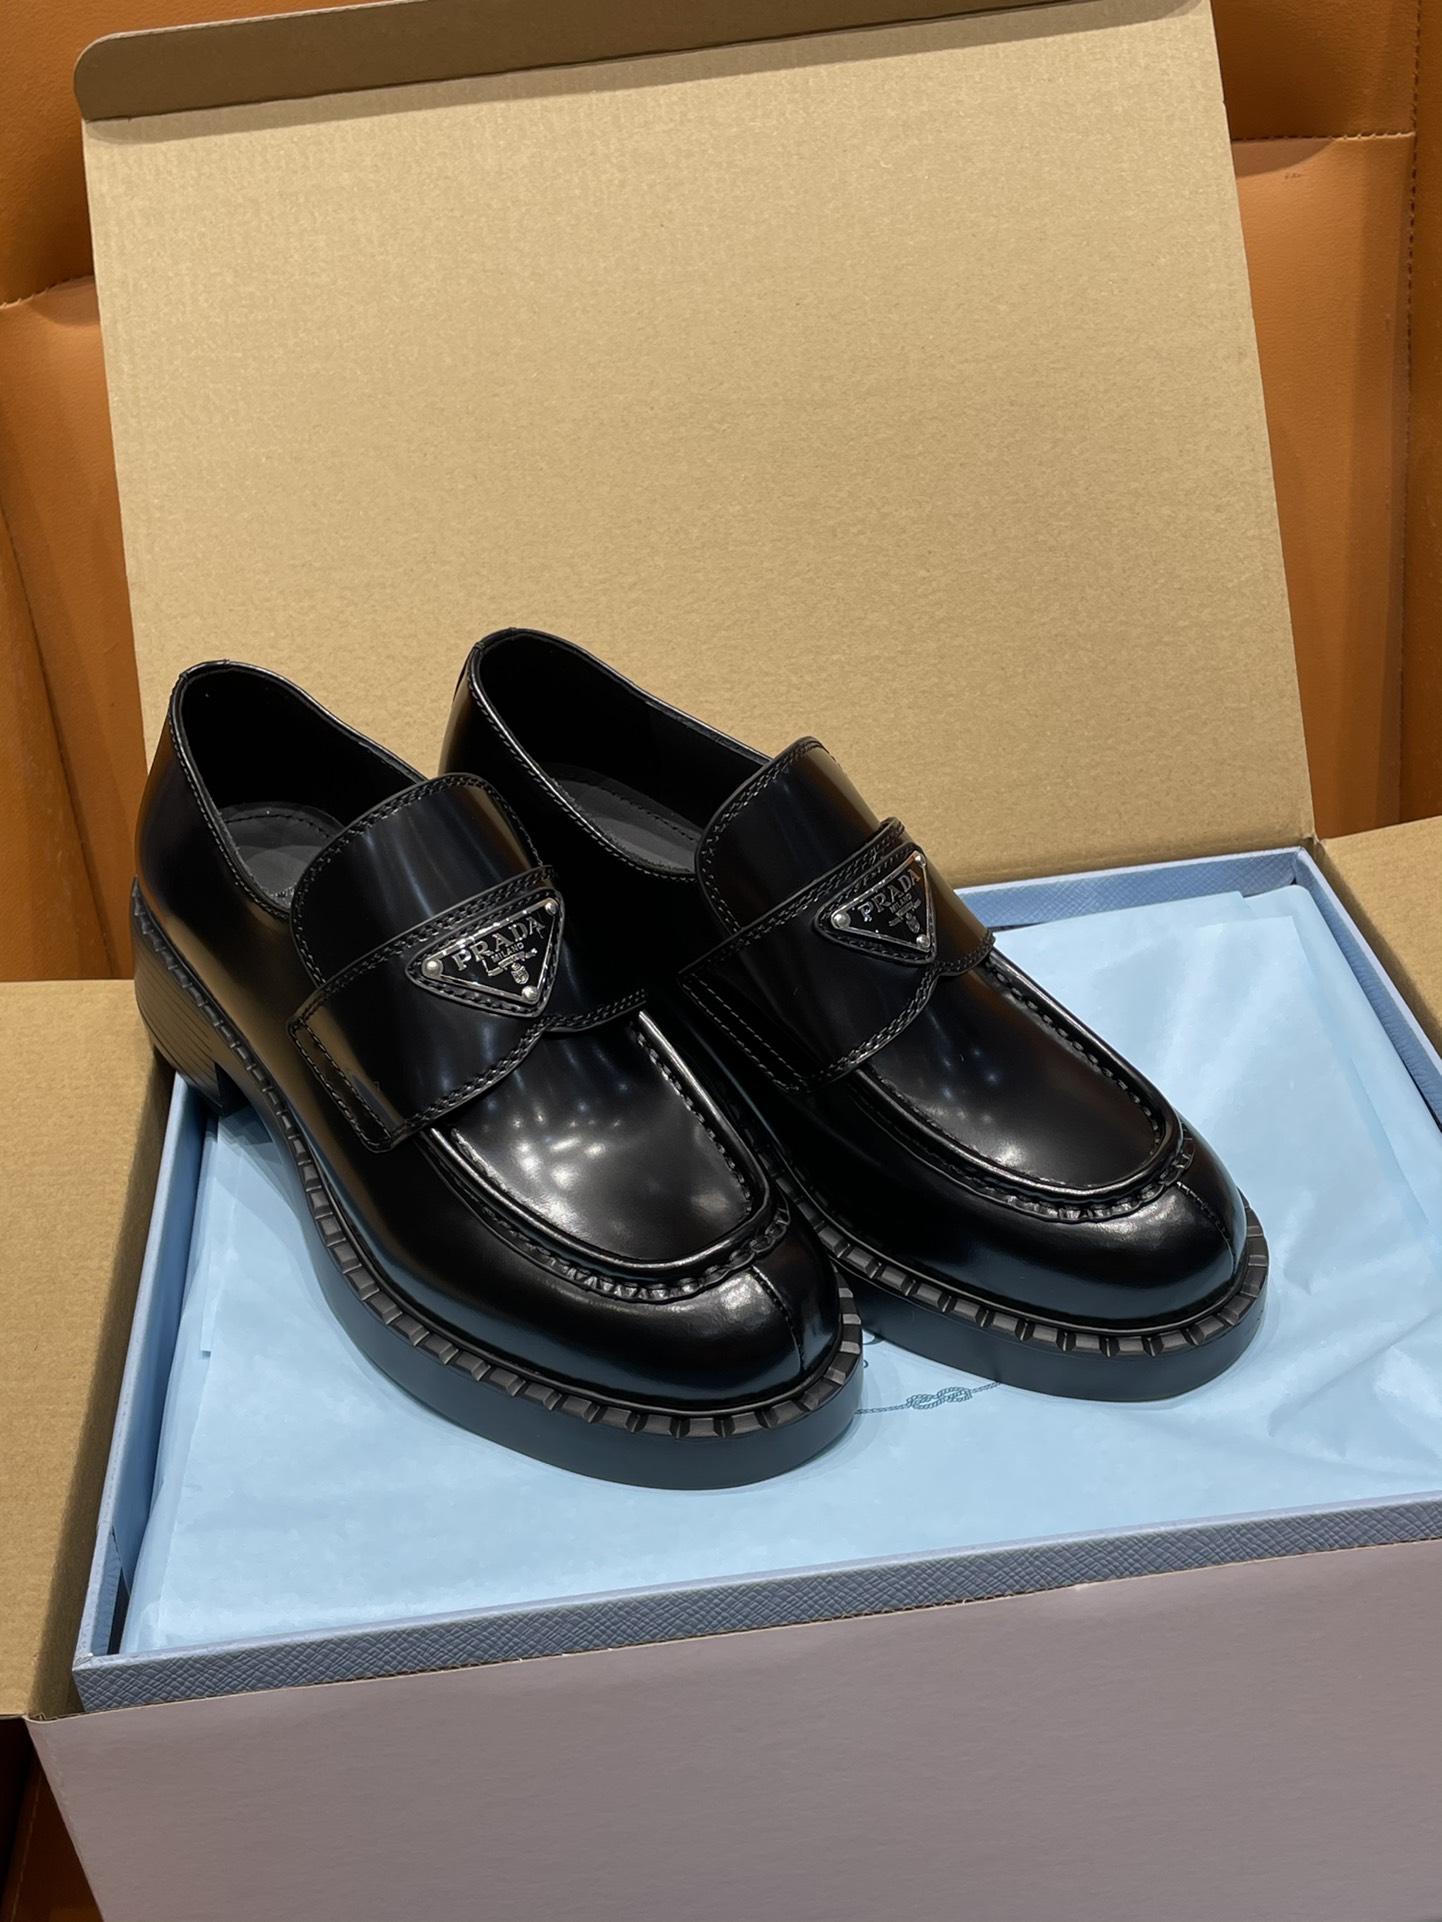 Prada Shoes Loafers Cowhide Patent Leather